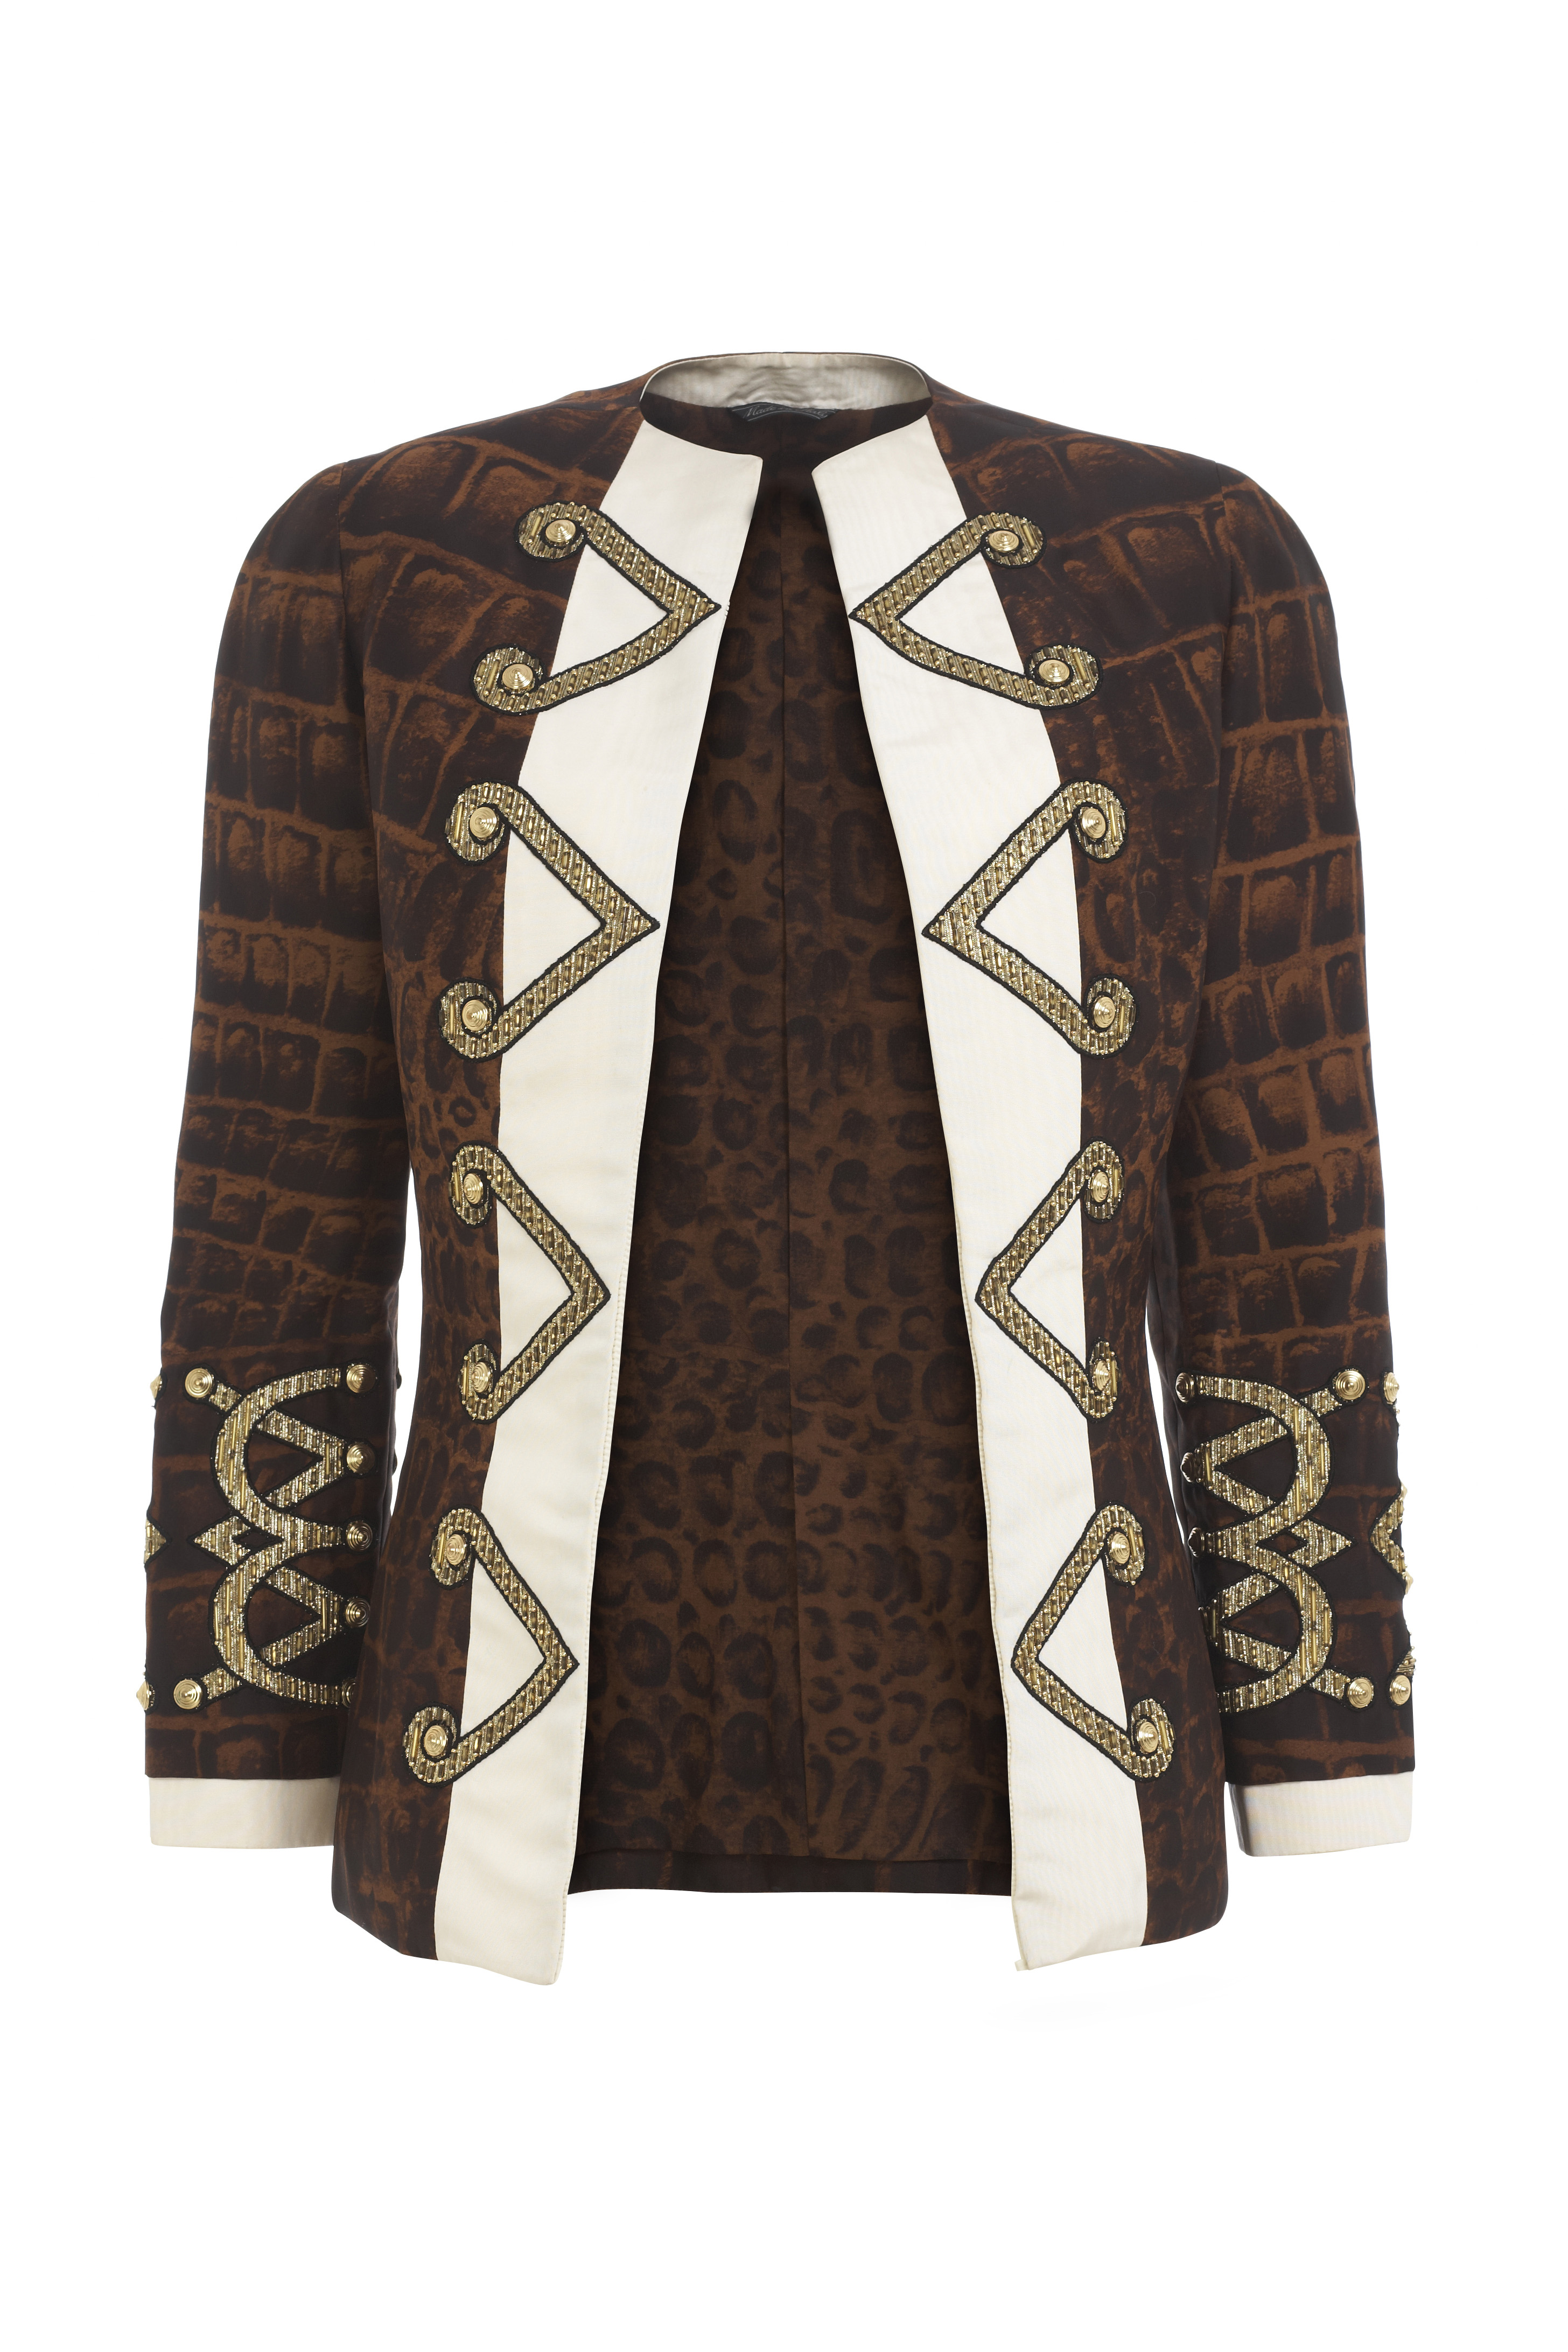 Gianni Versace Couture cream and animal print jacket | Curate8